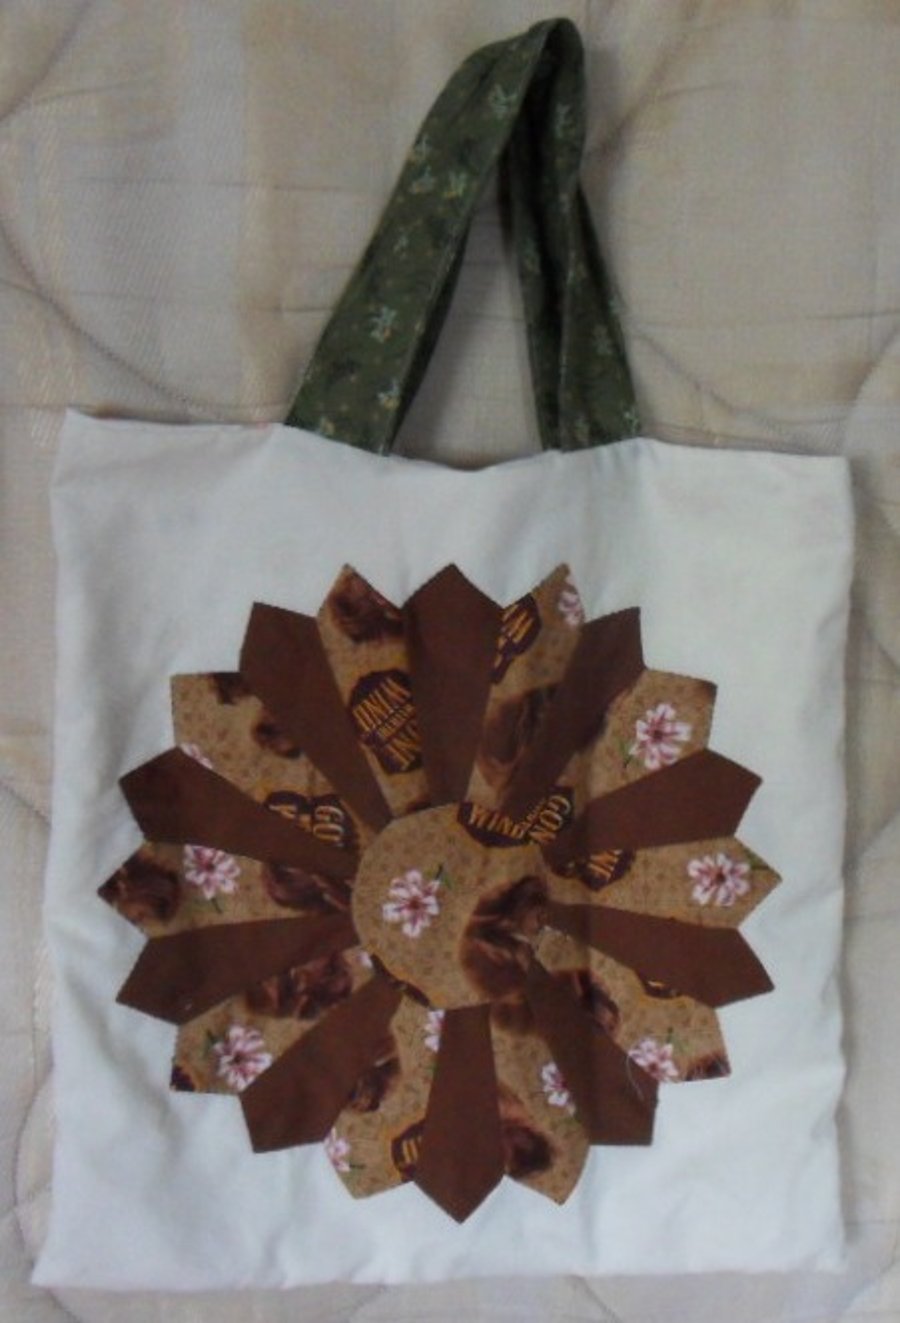 Homemade fabric bag. Gone with the wind design